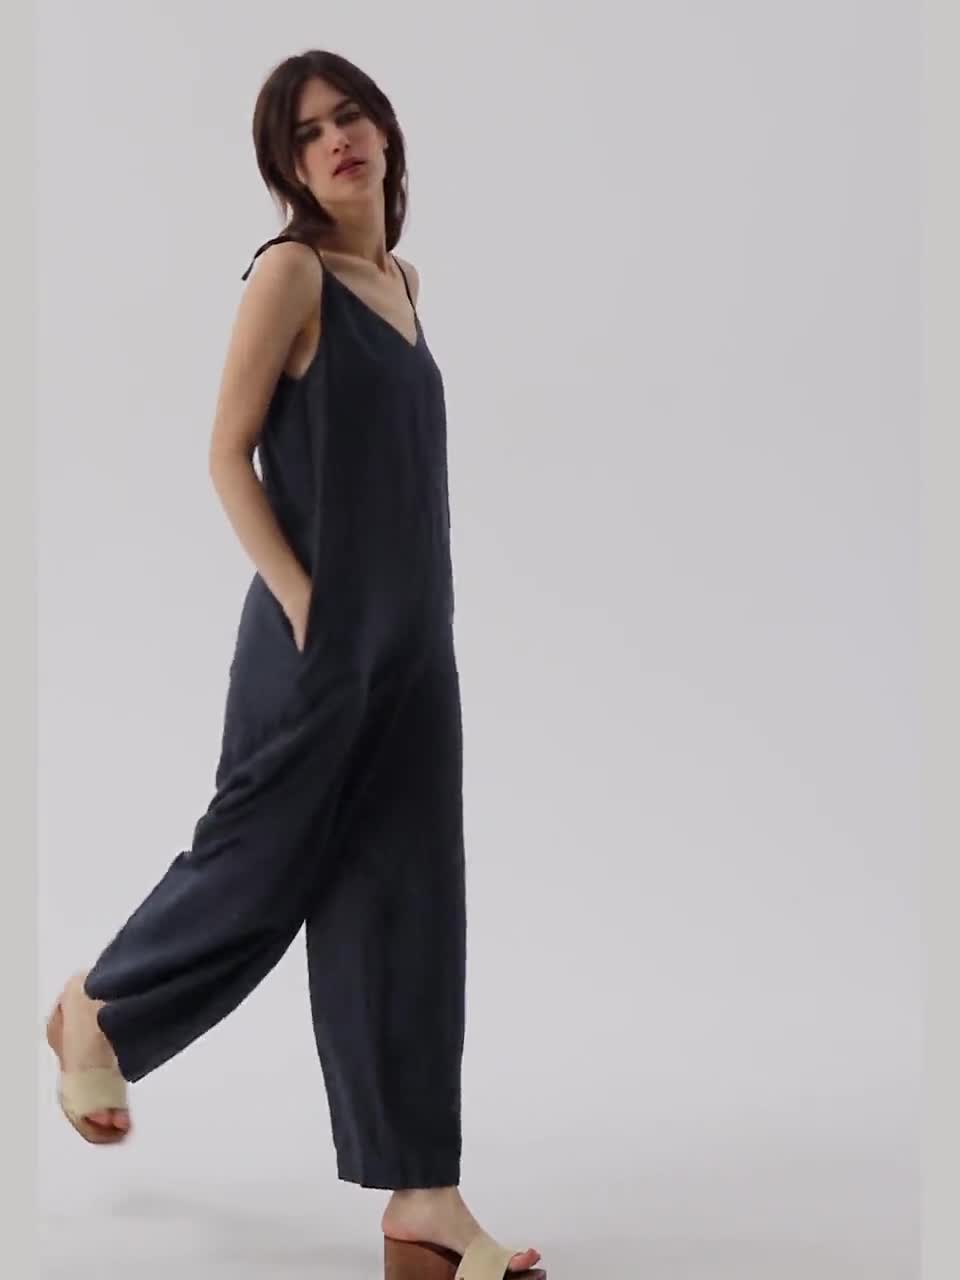 Jumpsuits  Get upto 80 Off on Jumpsuits Online at Myntra